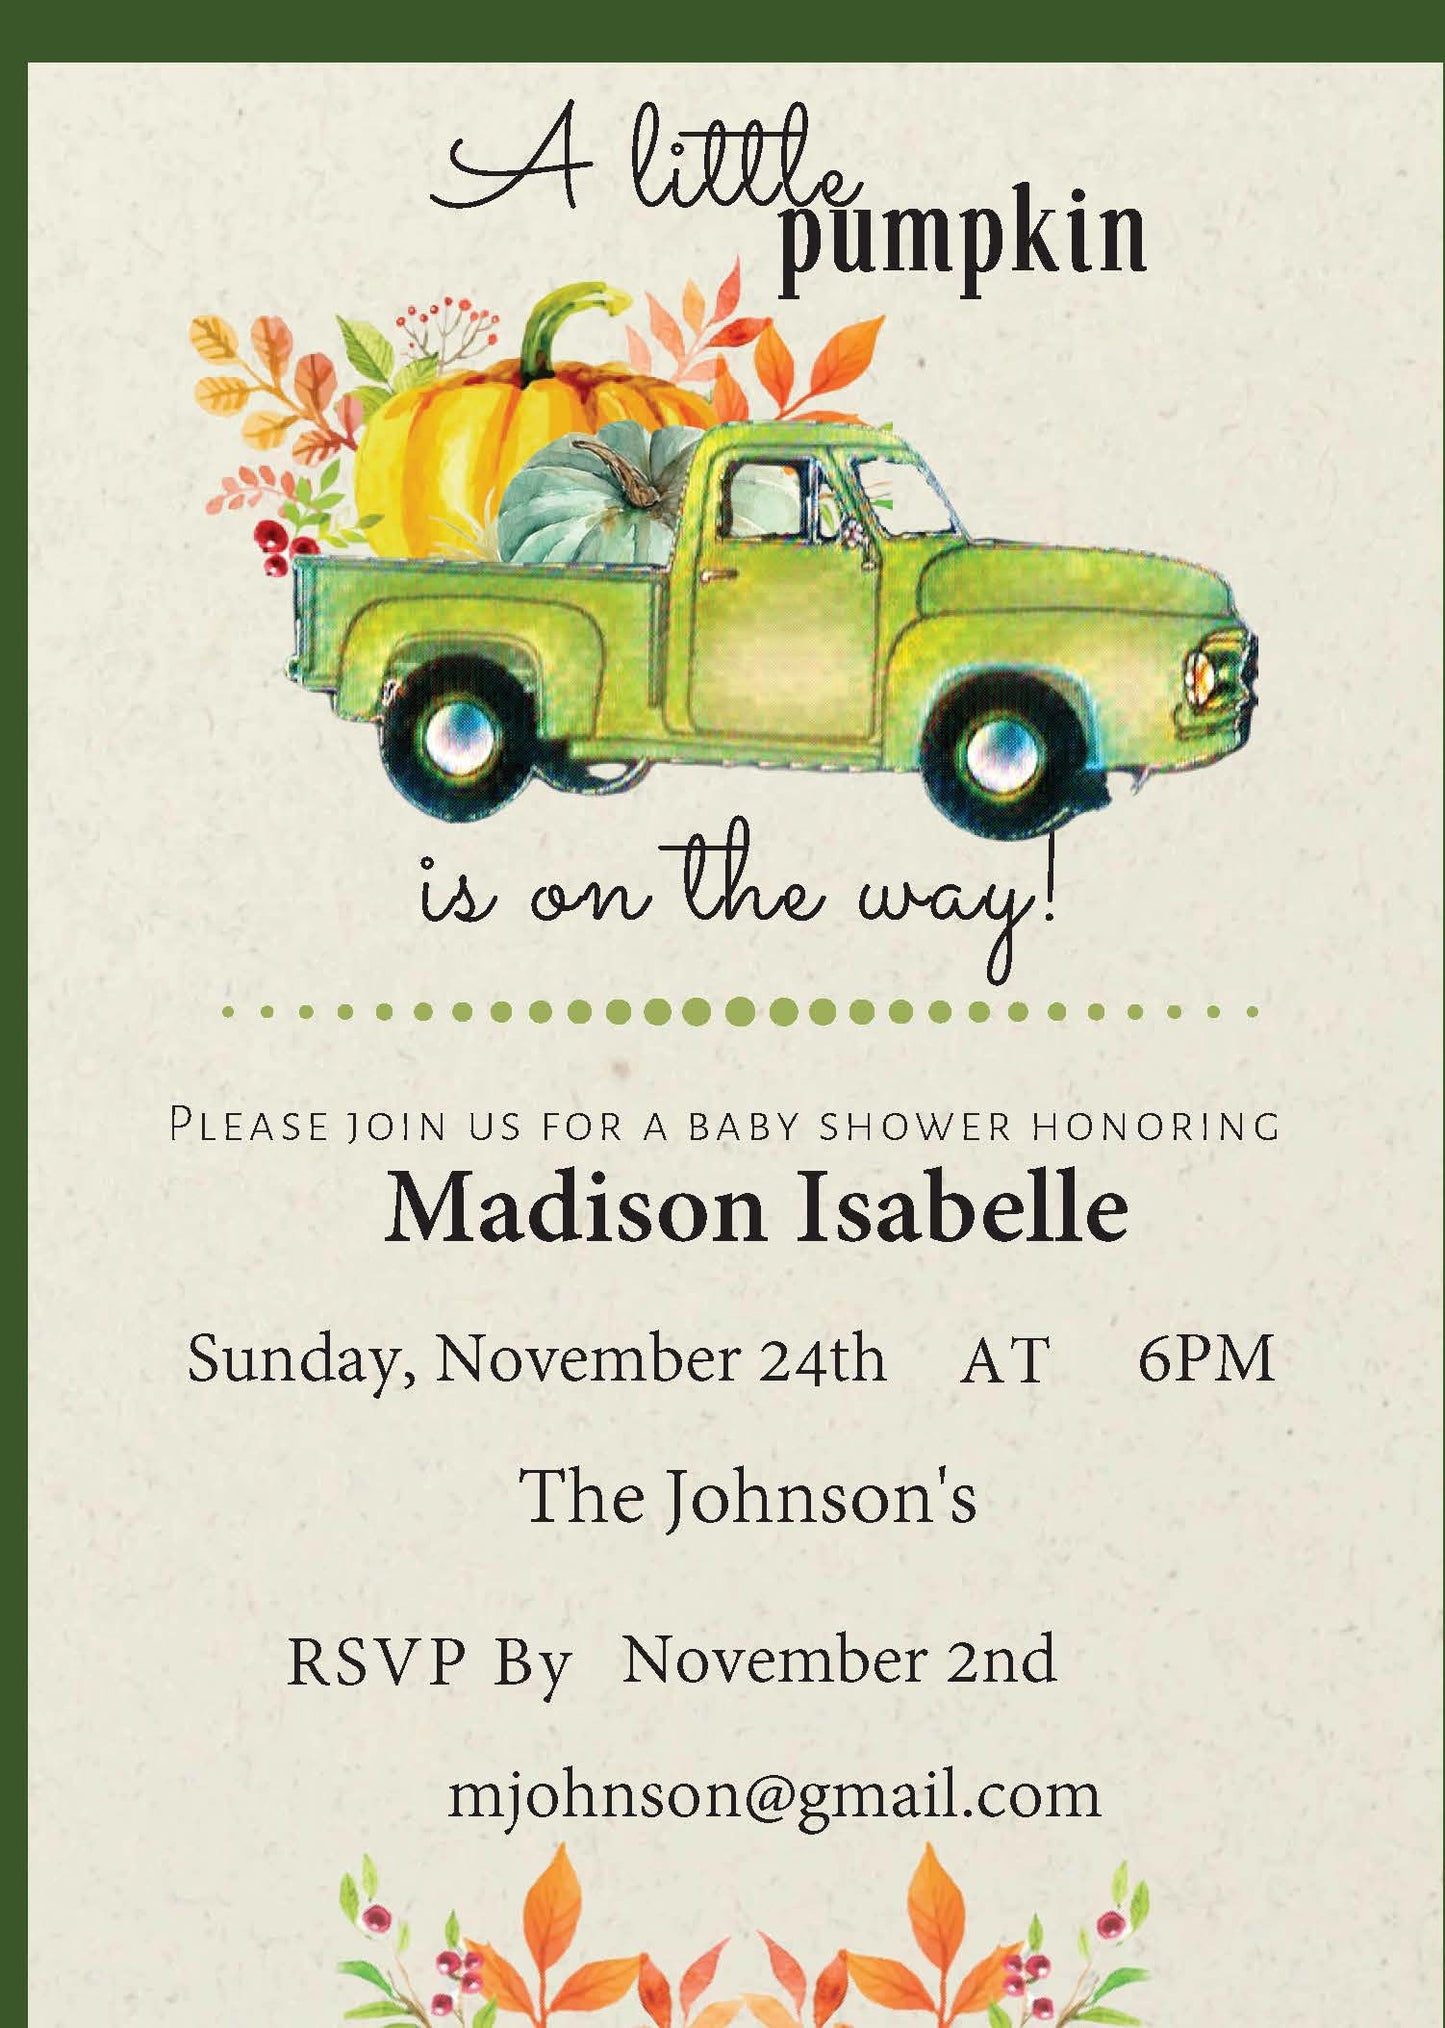 Baby Shower Invitation Green Truck with Pumpkins Bundles (Editable and Instant download)